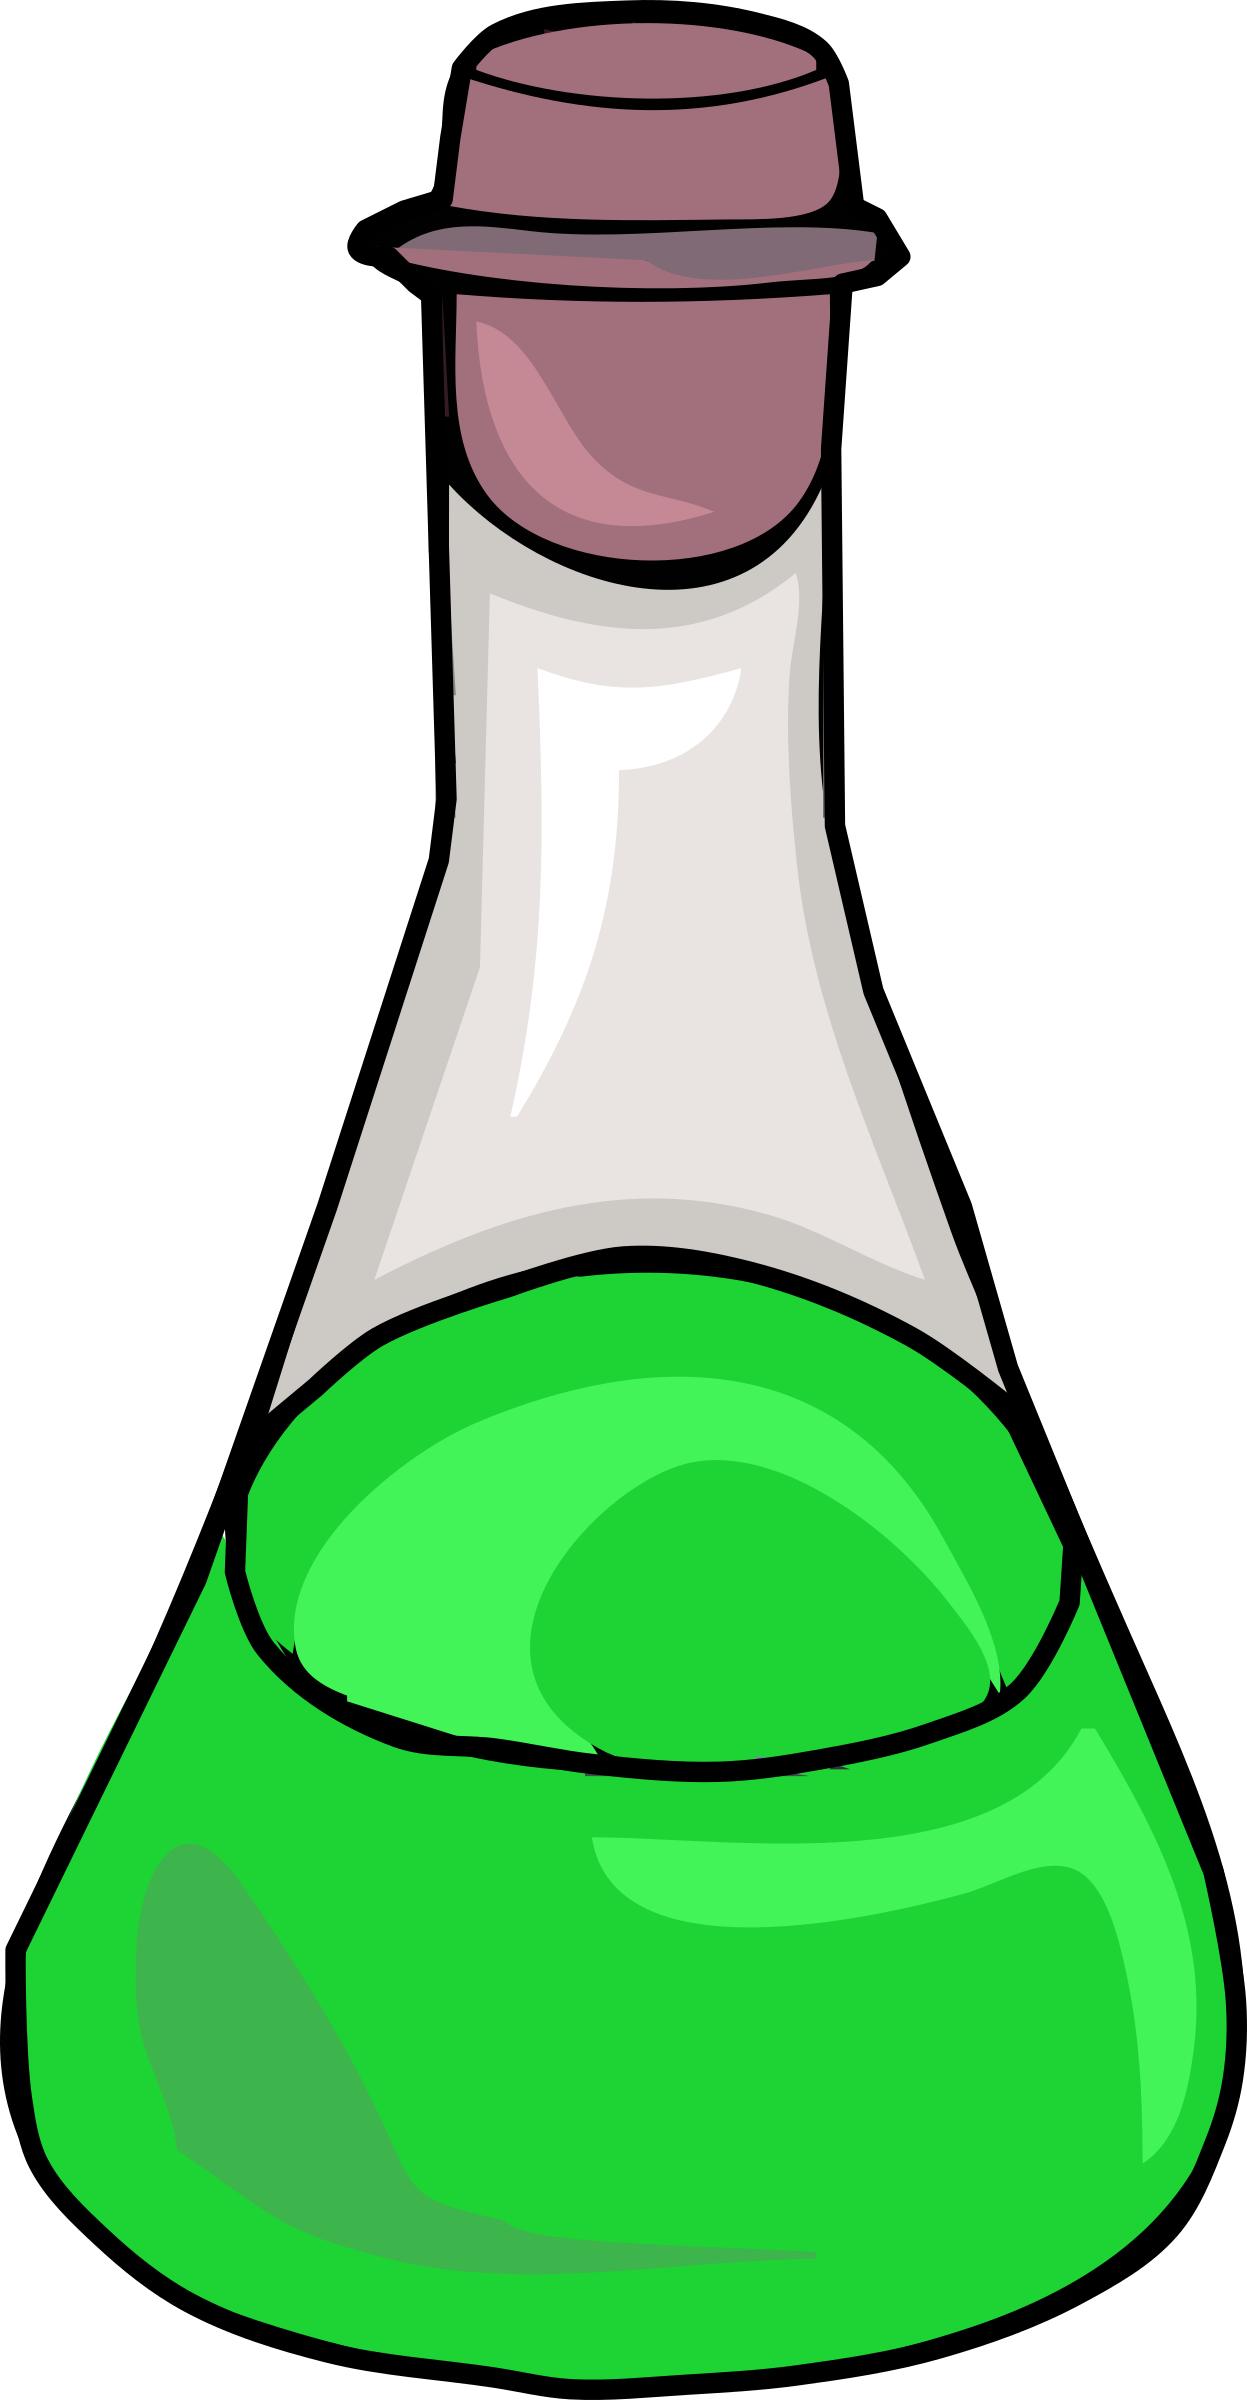 Green Science Bottle icons